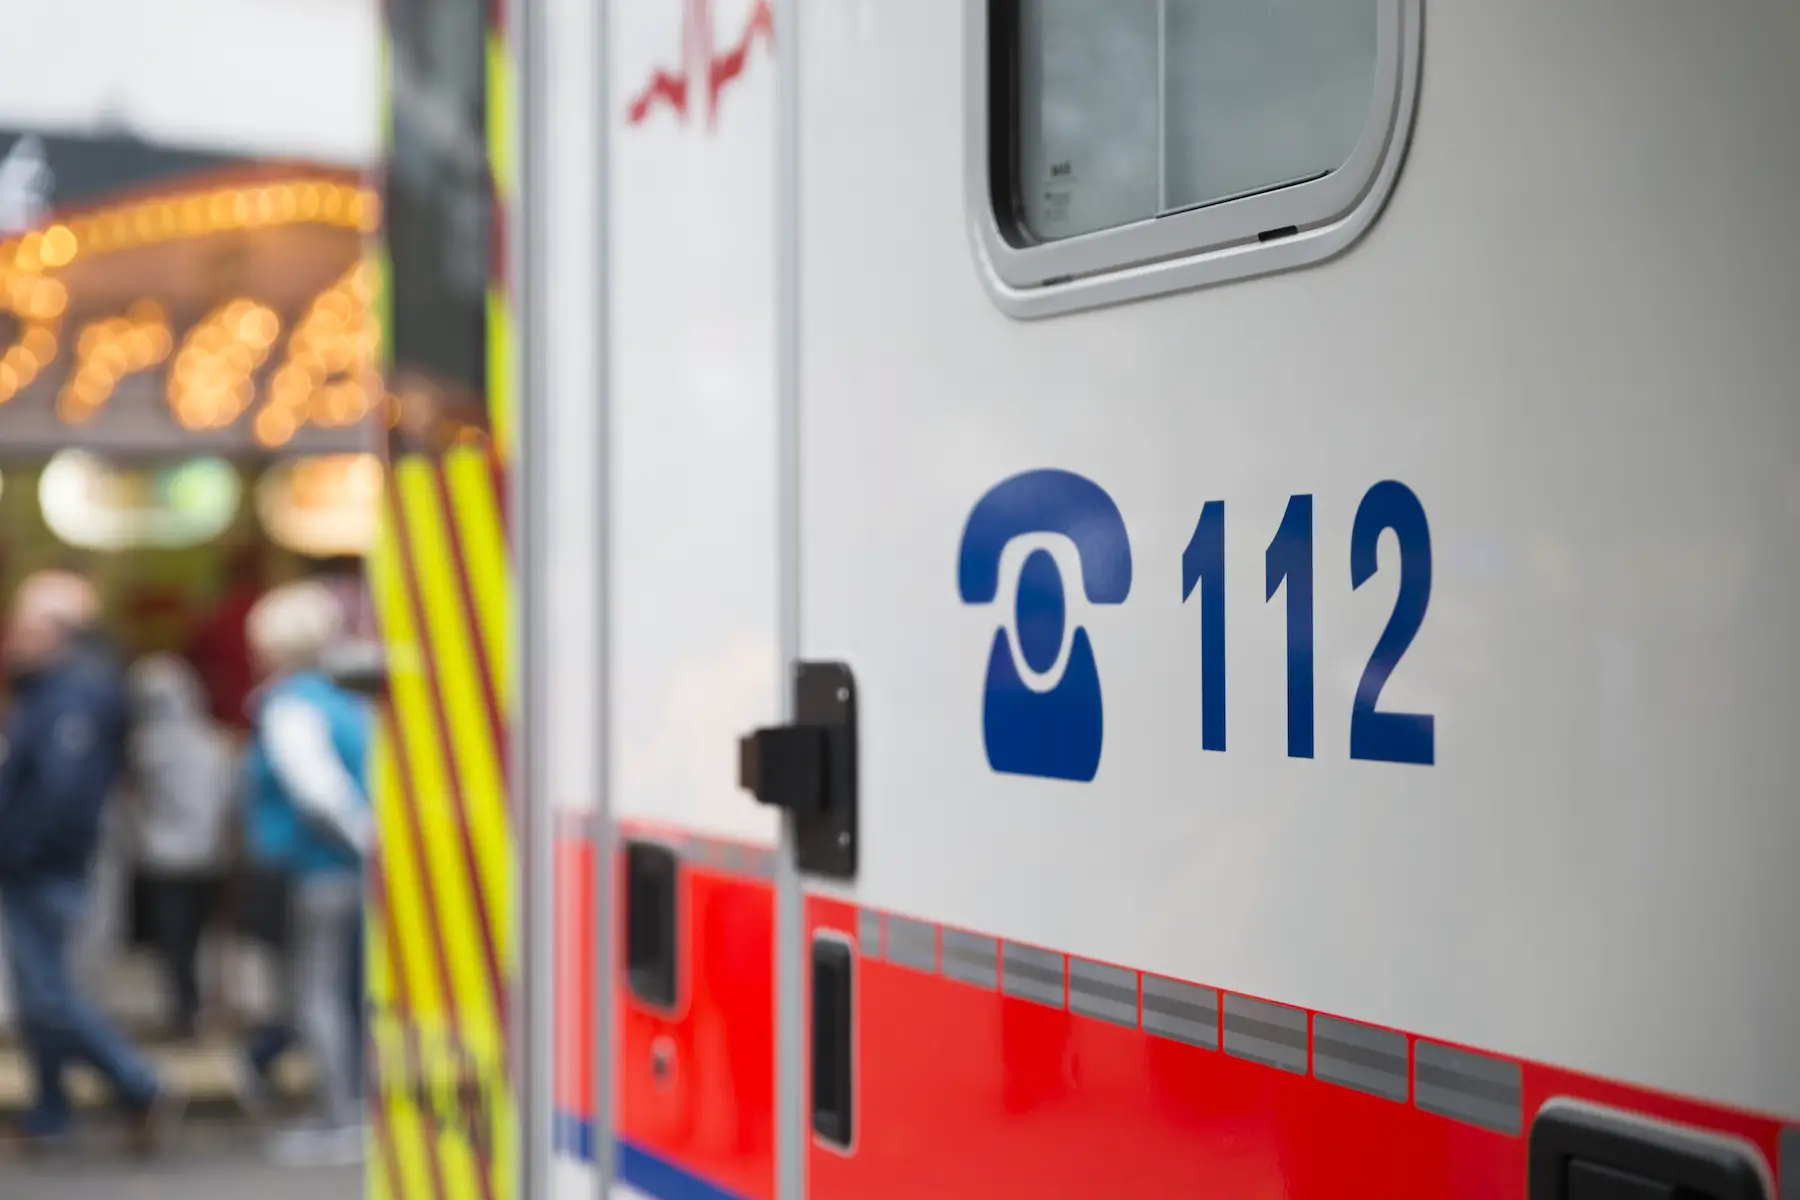 Close-up of a German ambulance parked at a Christmas market, with the emergency number 112 displayed on the vehicle's side